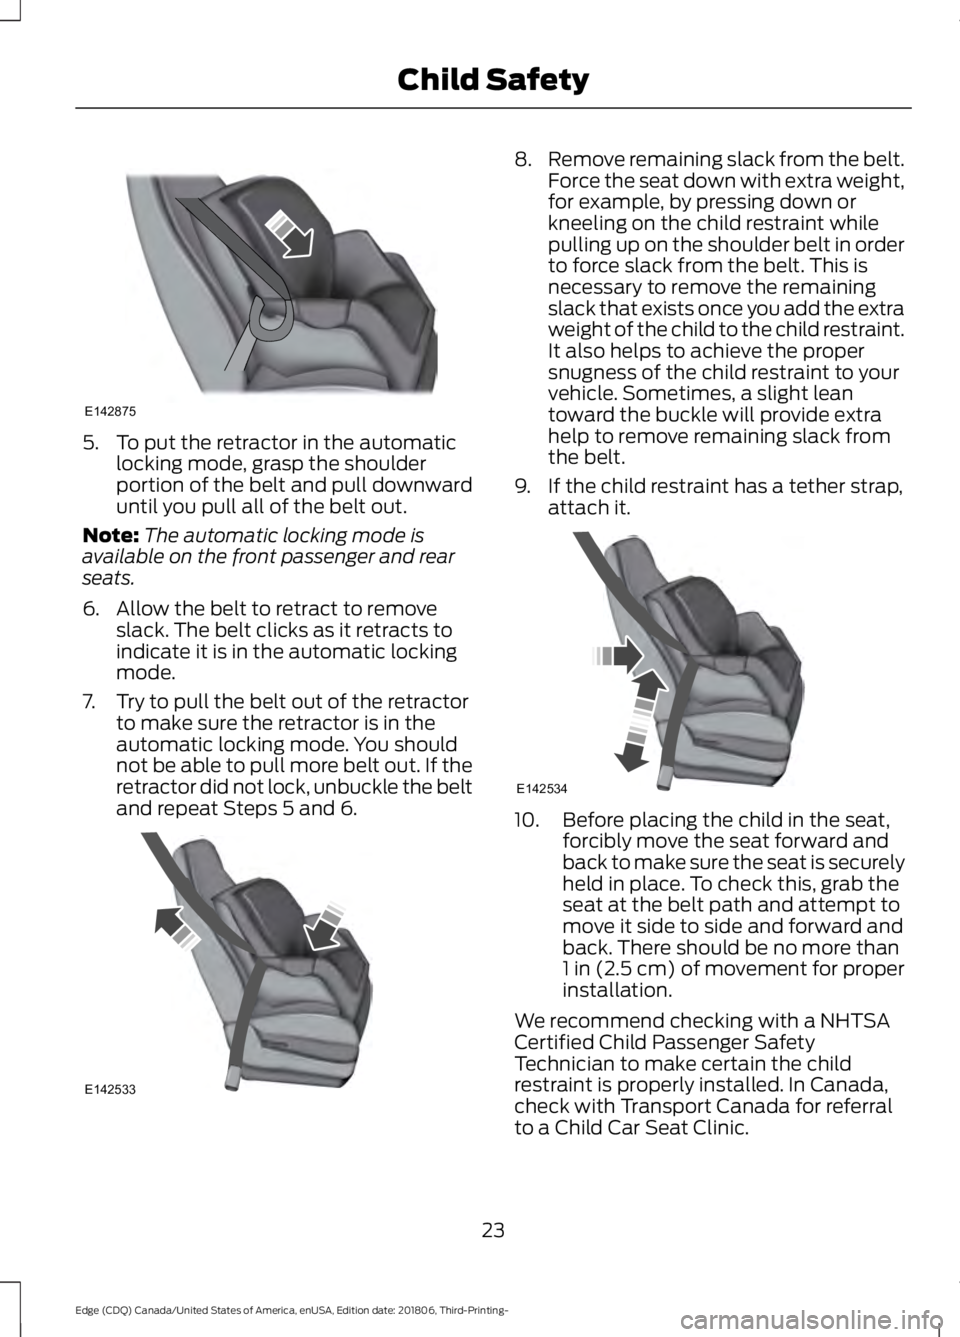 FORD EDGE 2019  Owners Manual 5. To put the retractor in the automatic
locking mode, grasp the shoulder
portion of the belt and pull downward
until you pull all of the belt out.
Note: The automatic locking mode is
available on the